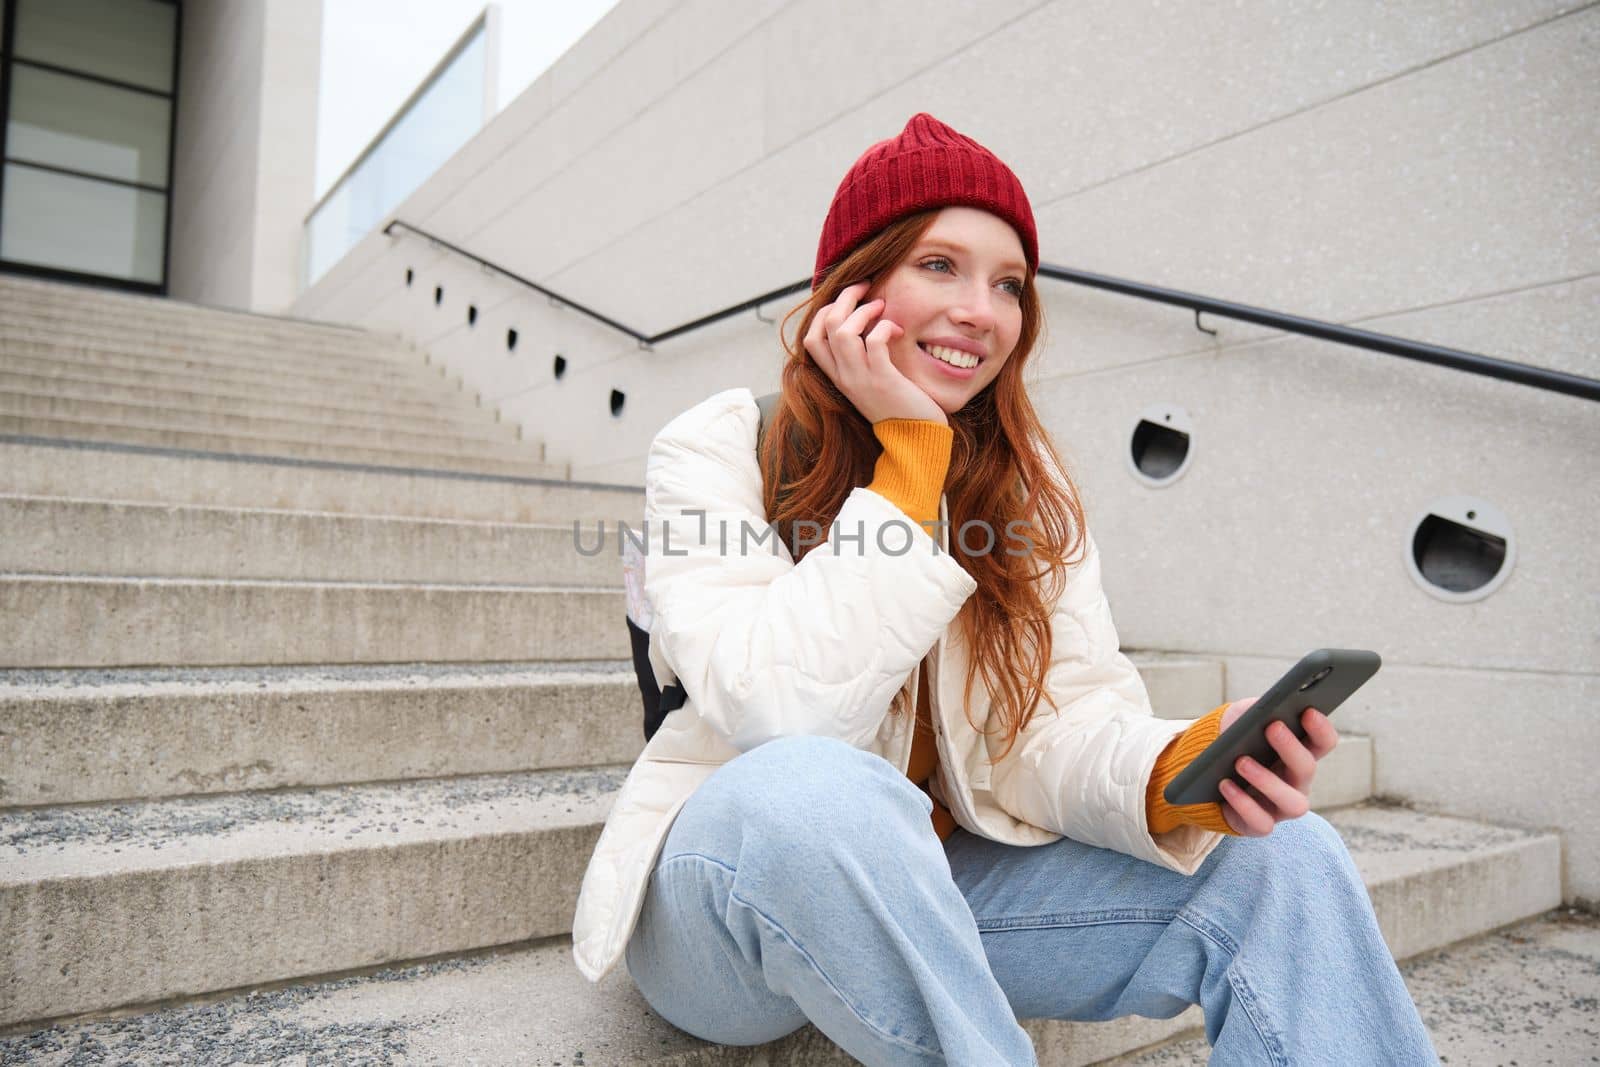 Stylish european girl with red hair, sits on public stairs with smartphone, places online order, sends message on mobile phone social app, smiles happily.